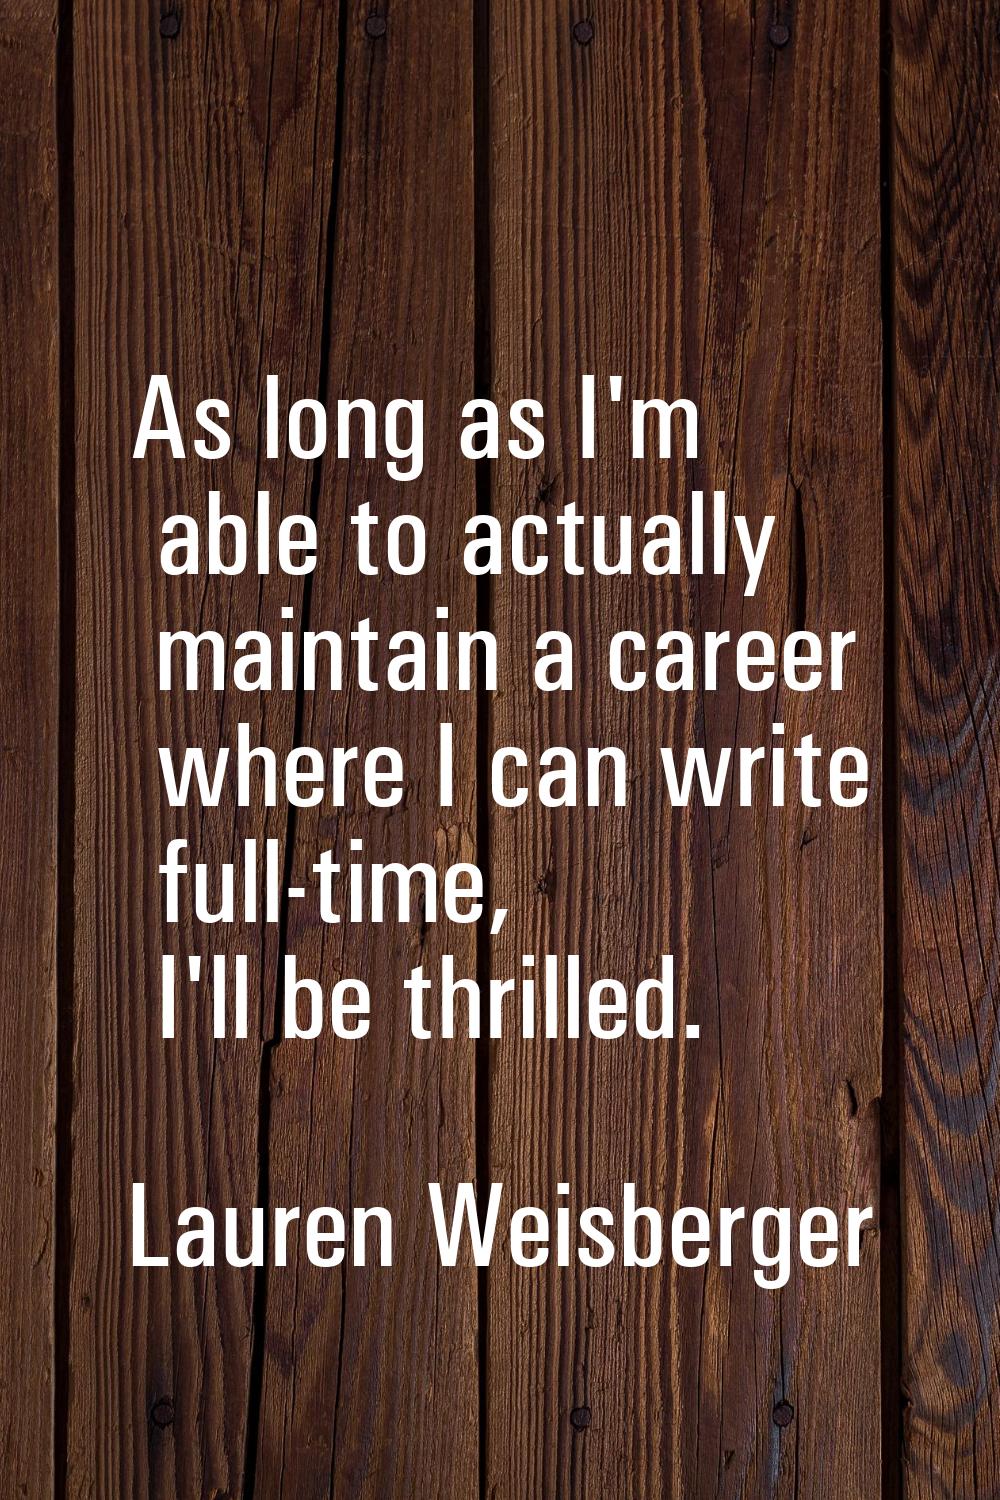 As long as I'm able to actually maintain a career where I can write full-time, I'll be thrilled.